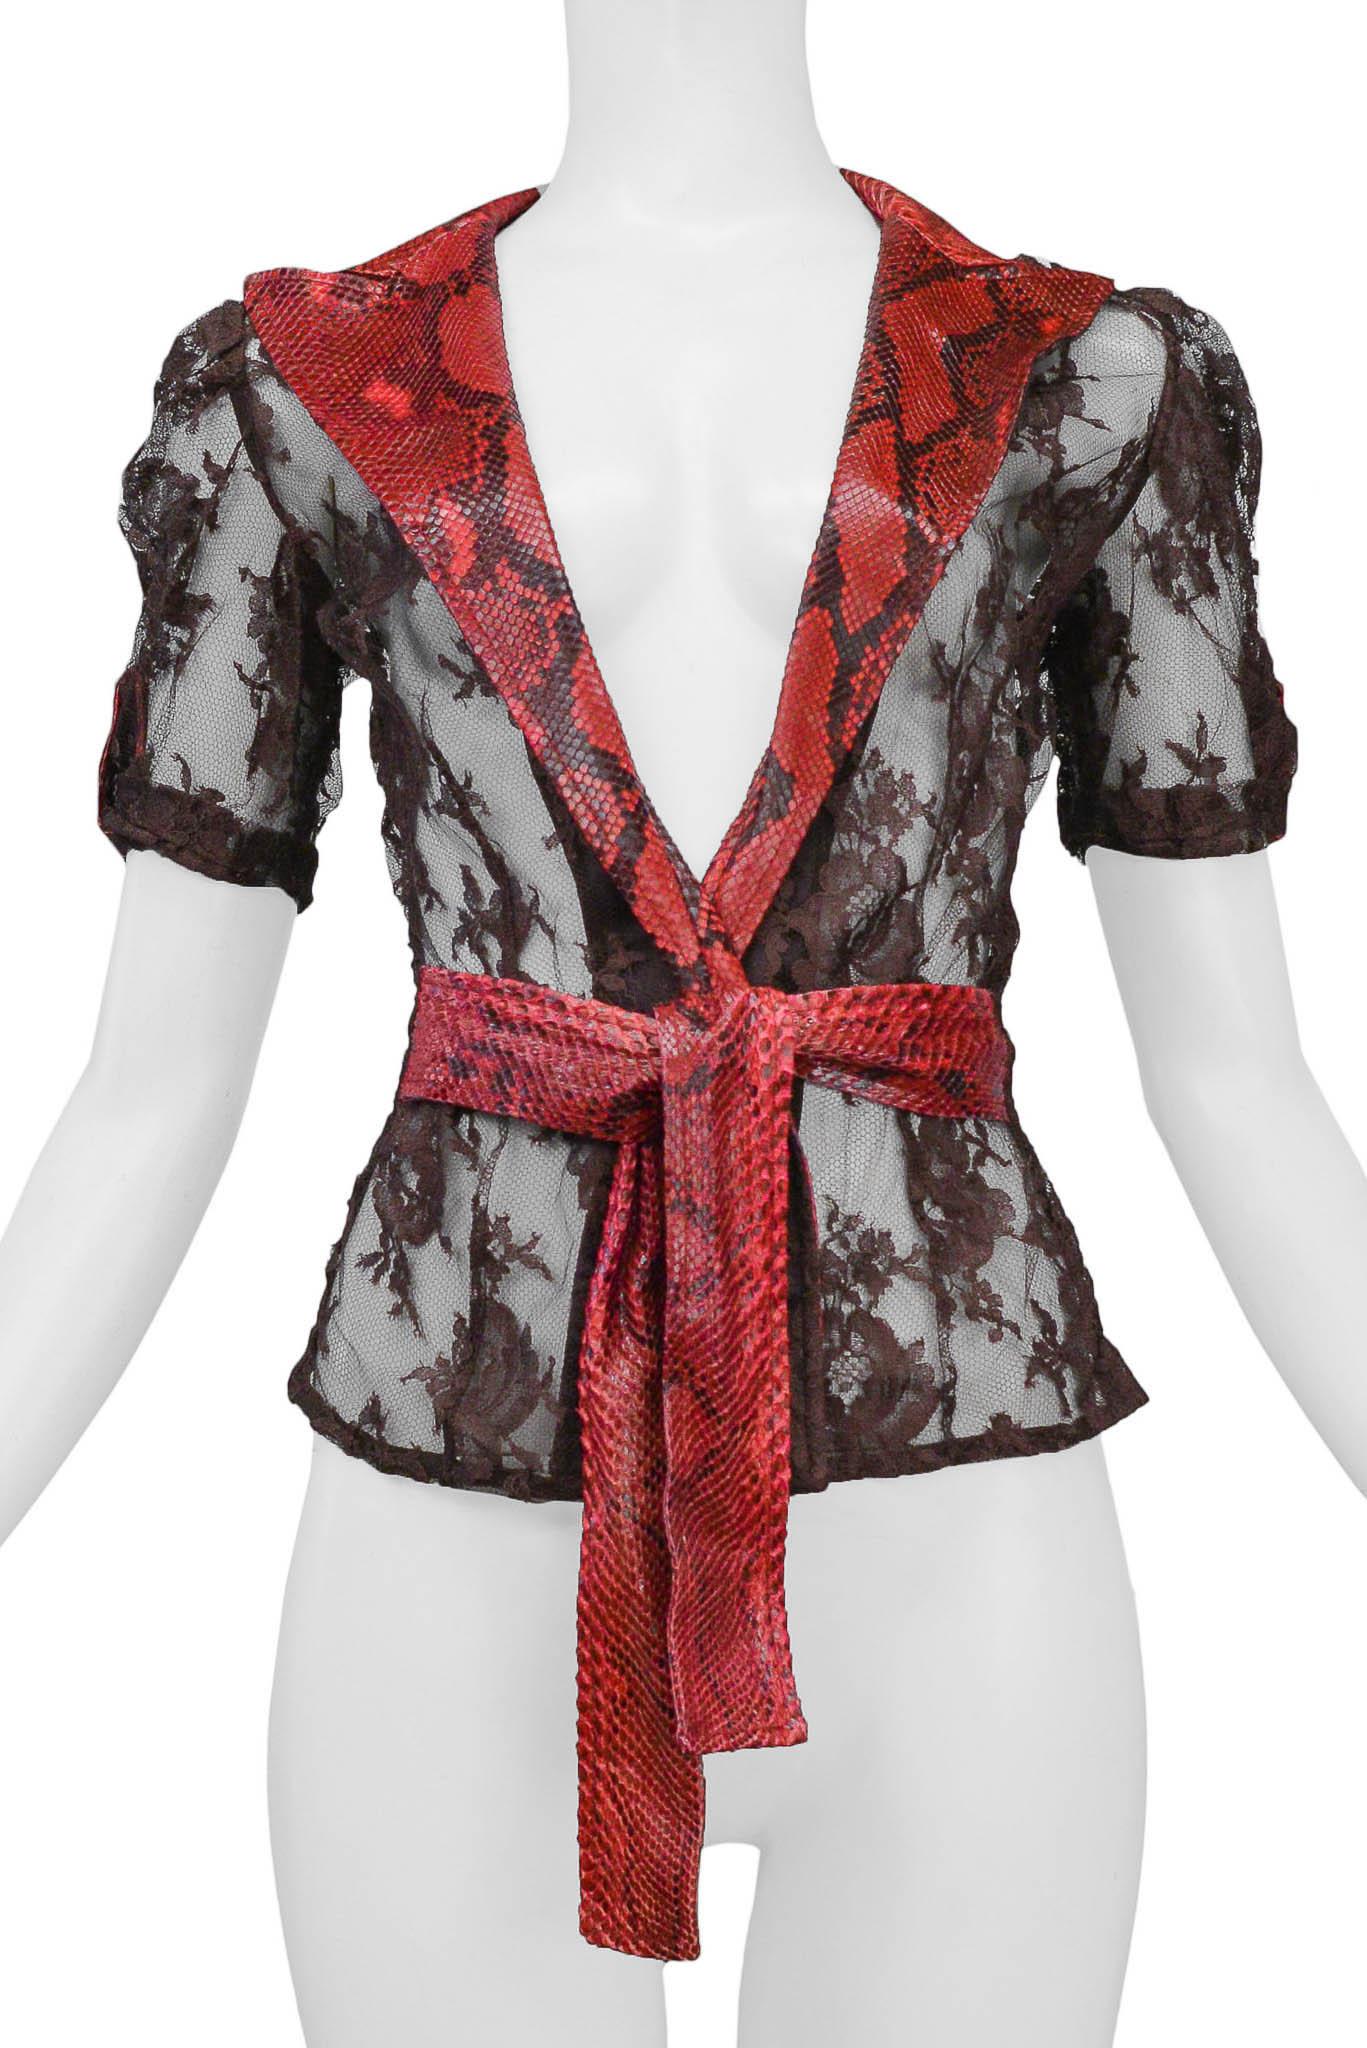 Dolce & Gabbana Brown Lace Top With Red Python Trim 2005 In Excellent Condition For Sale In Los Angeles, CA